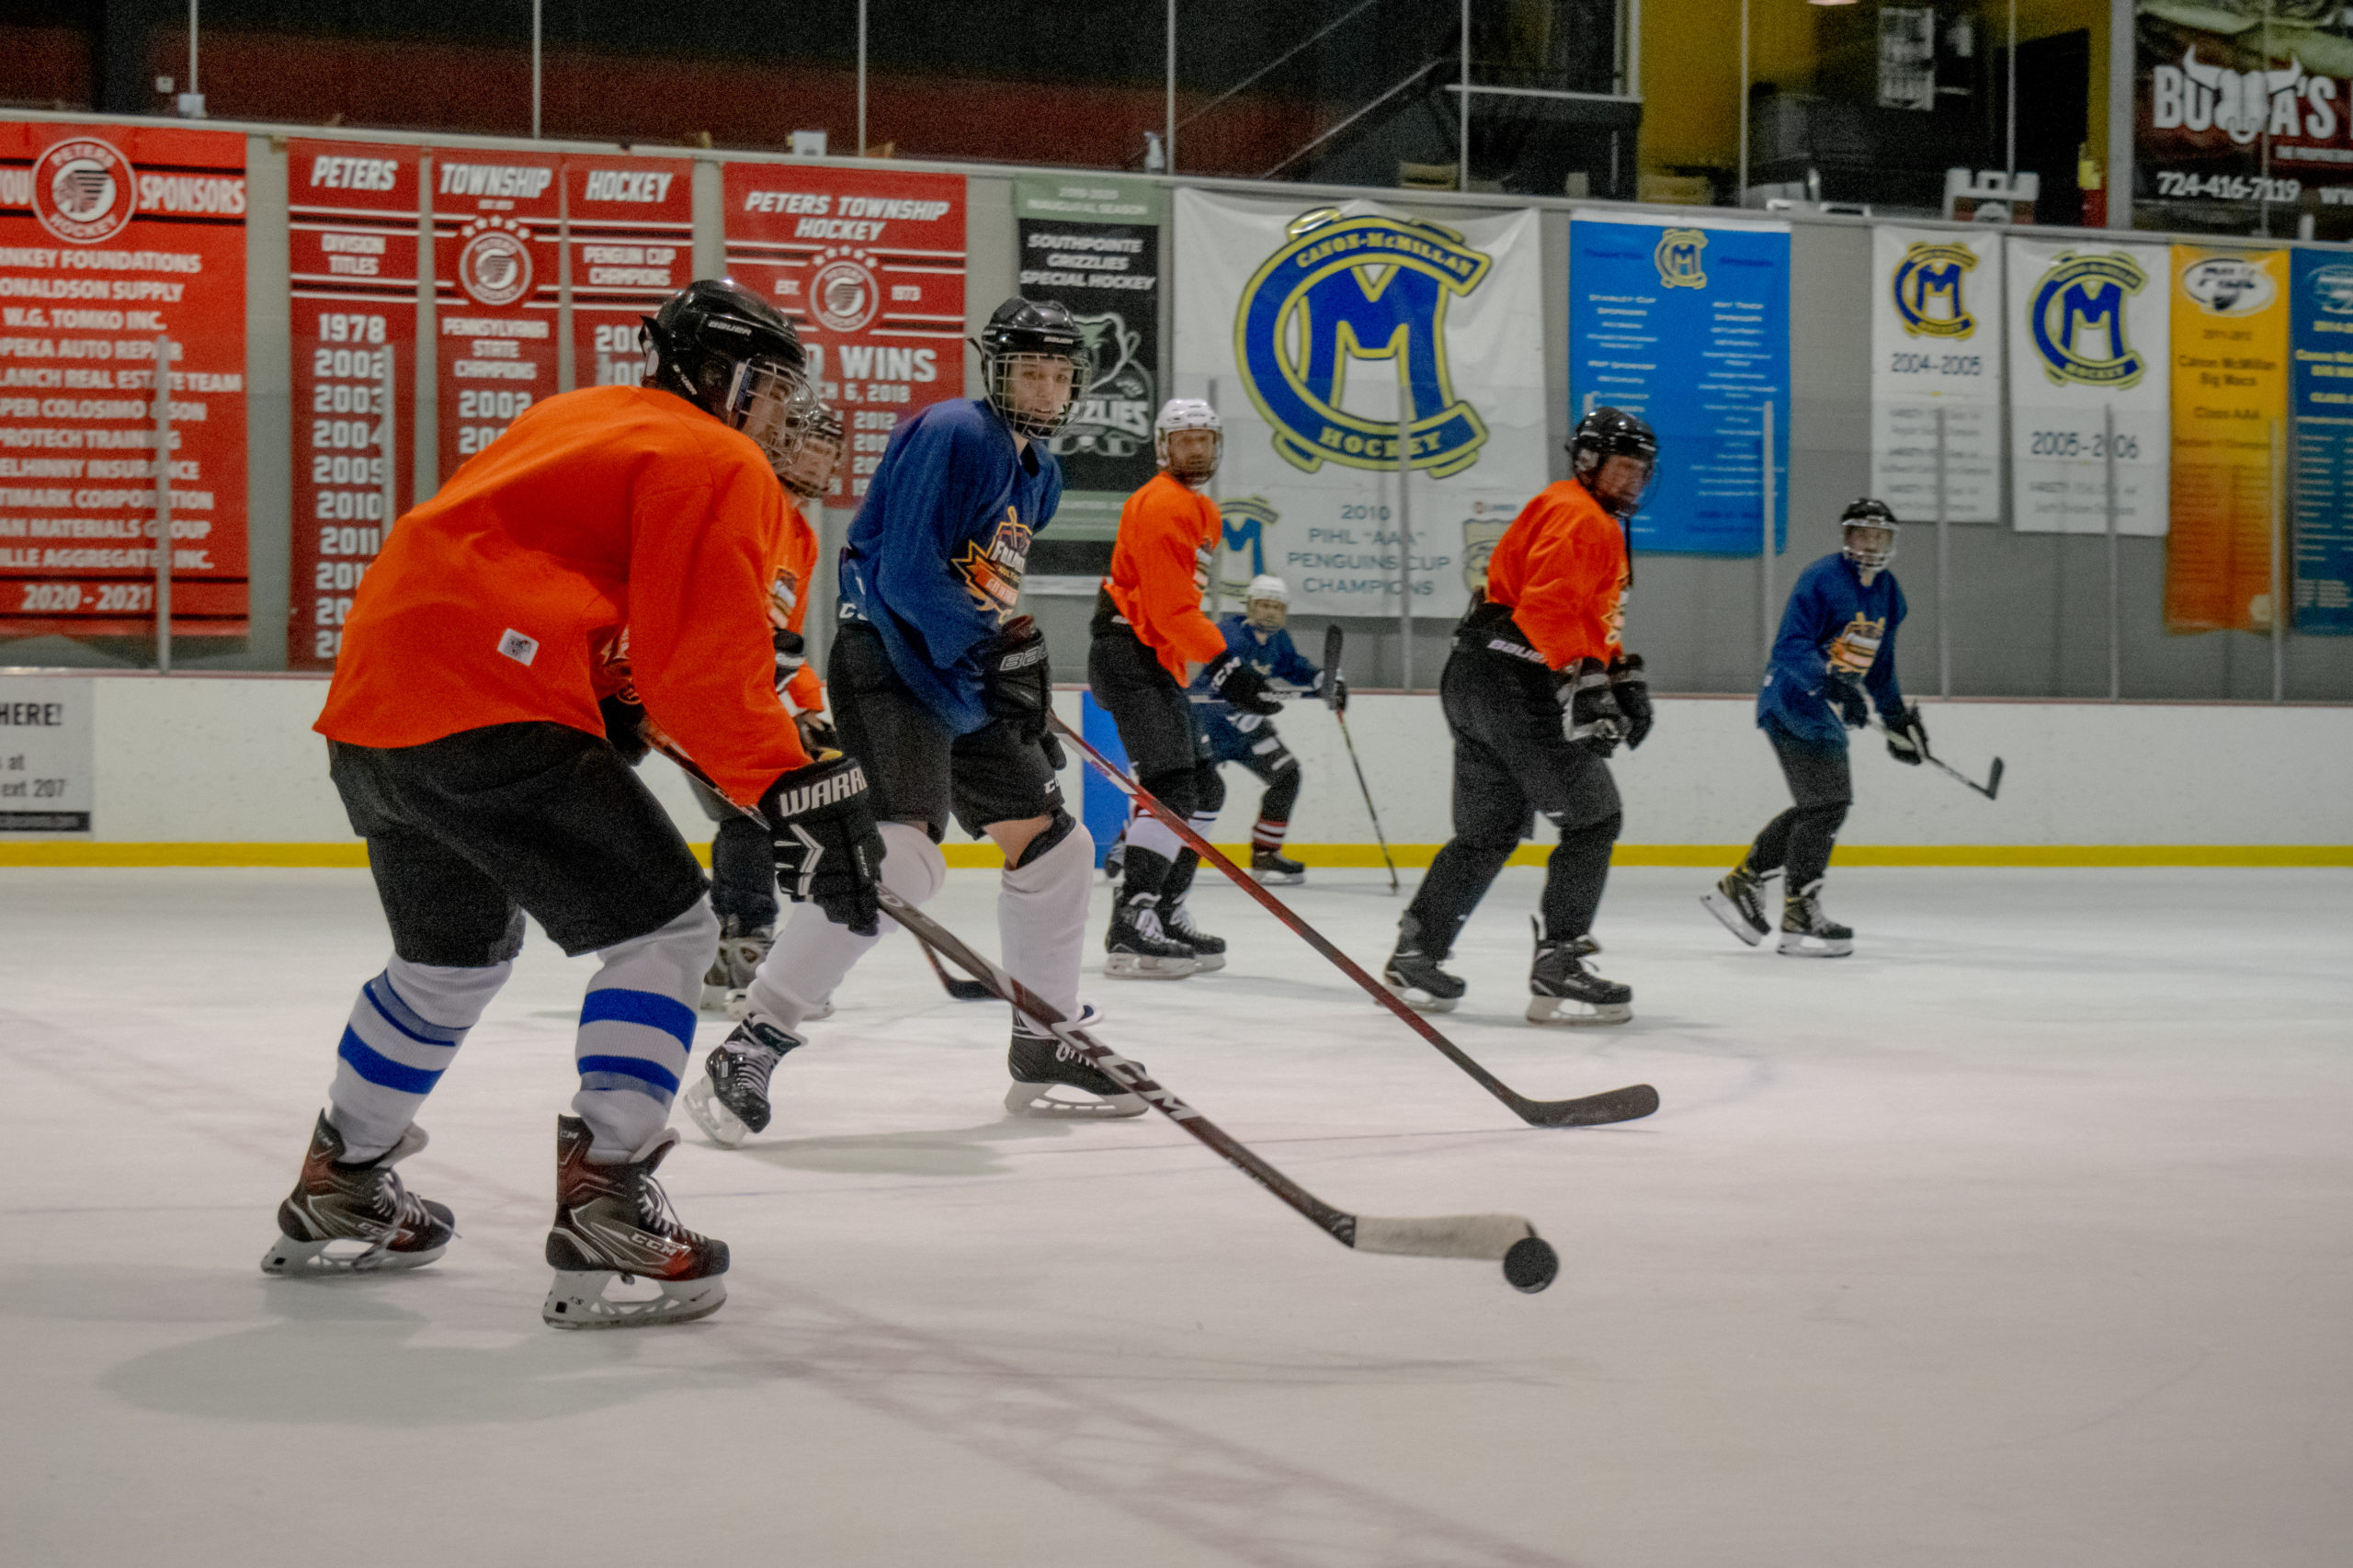 Foundry Adult Hockey Players Competing